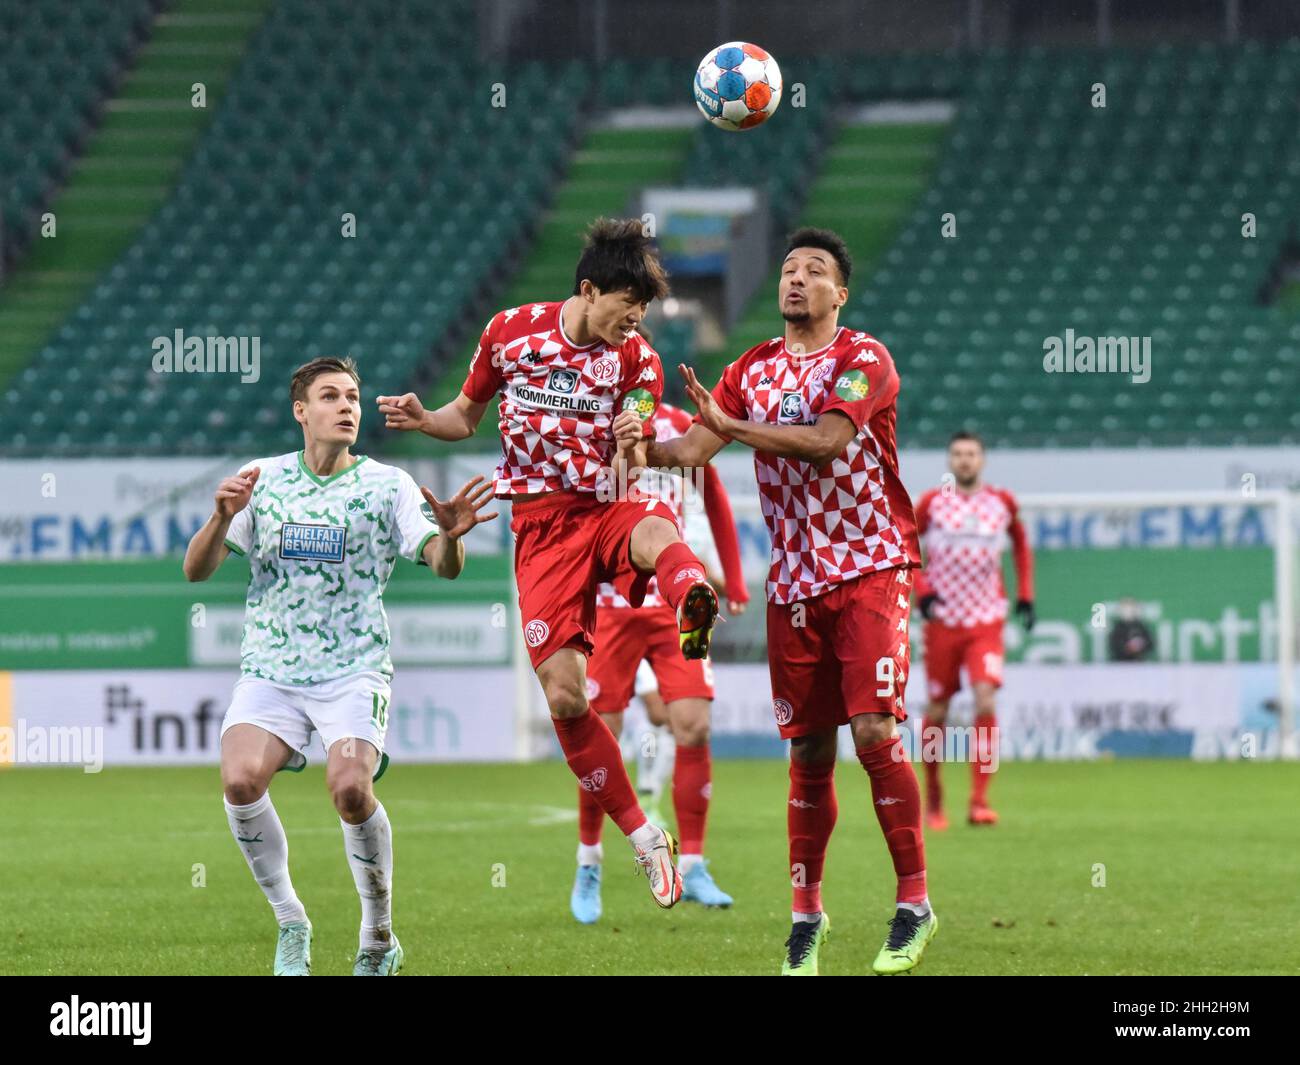 Fuerth, Germany. 22nd Jan, 2022. Germany, Fuerth, Sportpark Ronhof Thomas Sommer - 22 Jan 2022 - Fussball, 1.Bundesliga - SpVgg Greuther Fuerth vs. FSV Mainz 05 Image: (fLTR) Max Christiansen (SpVgg Greuther Fürth, 13), Jae-Sung Lee (Mainz, 7), Karim Oniswo (Mainz, 9) DFL regulations prohibit any use of photographs as image sequences and or quasi-video Credit: Ryan Evans/Alamy Live News Stock Photo